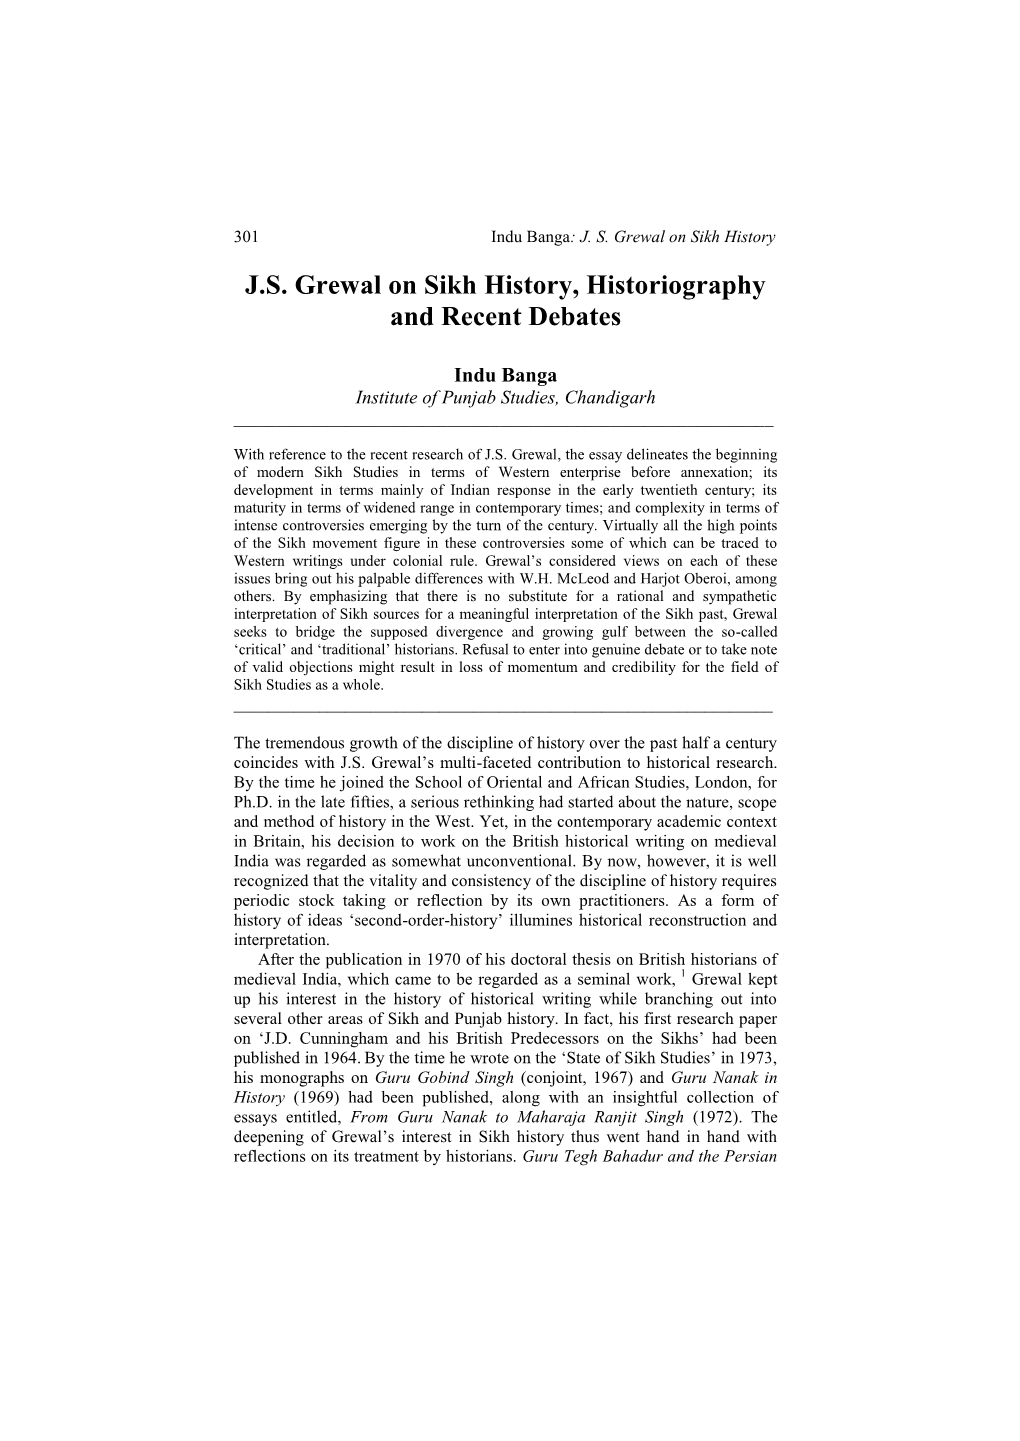 J.S. Grewal on Sikh History, Historiography and Recent Debates